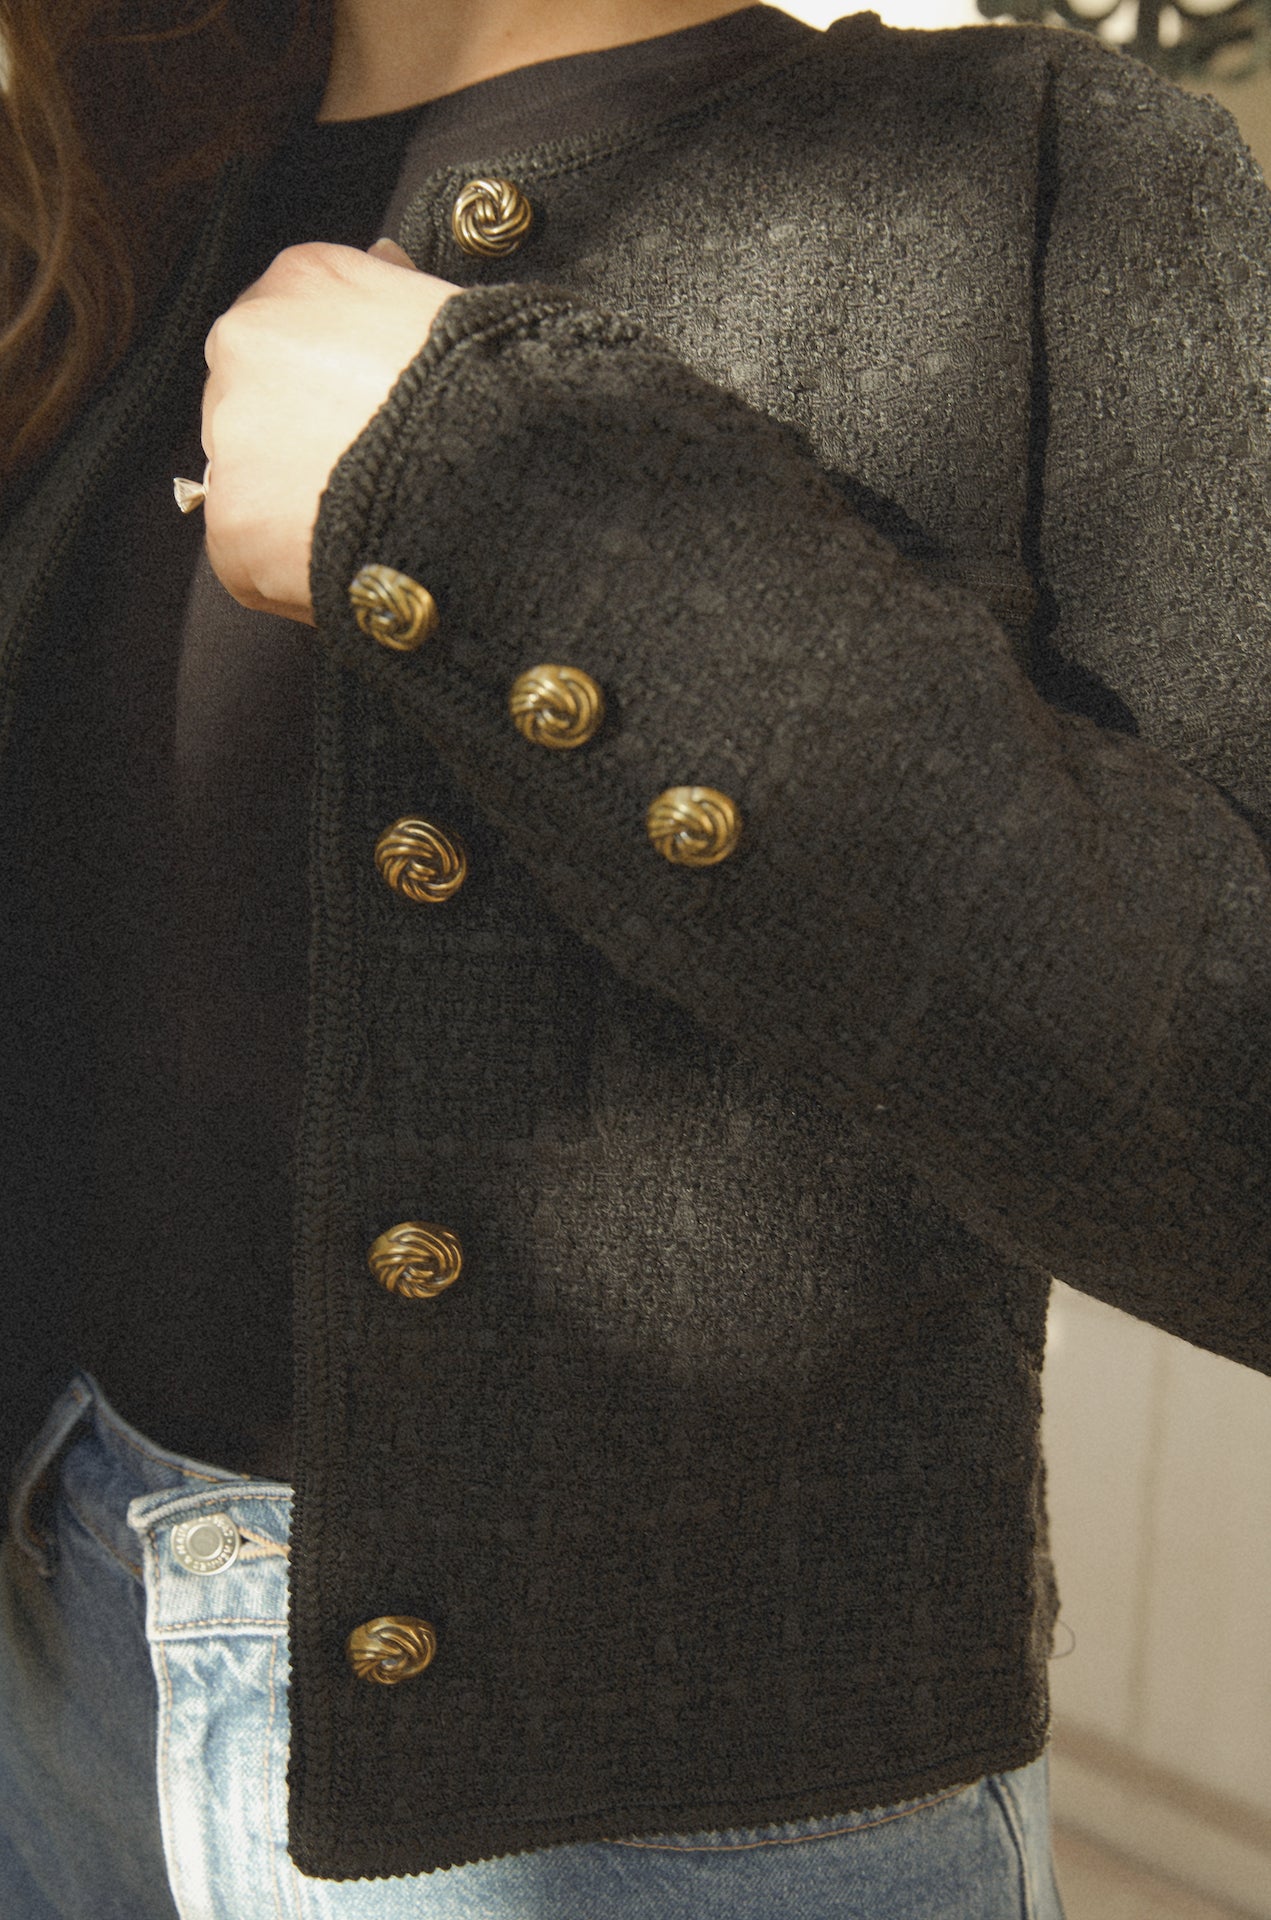 black tweed blazer jacket with gold buttons